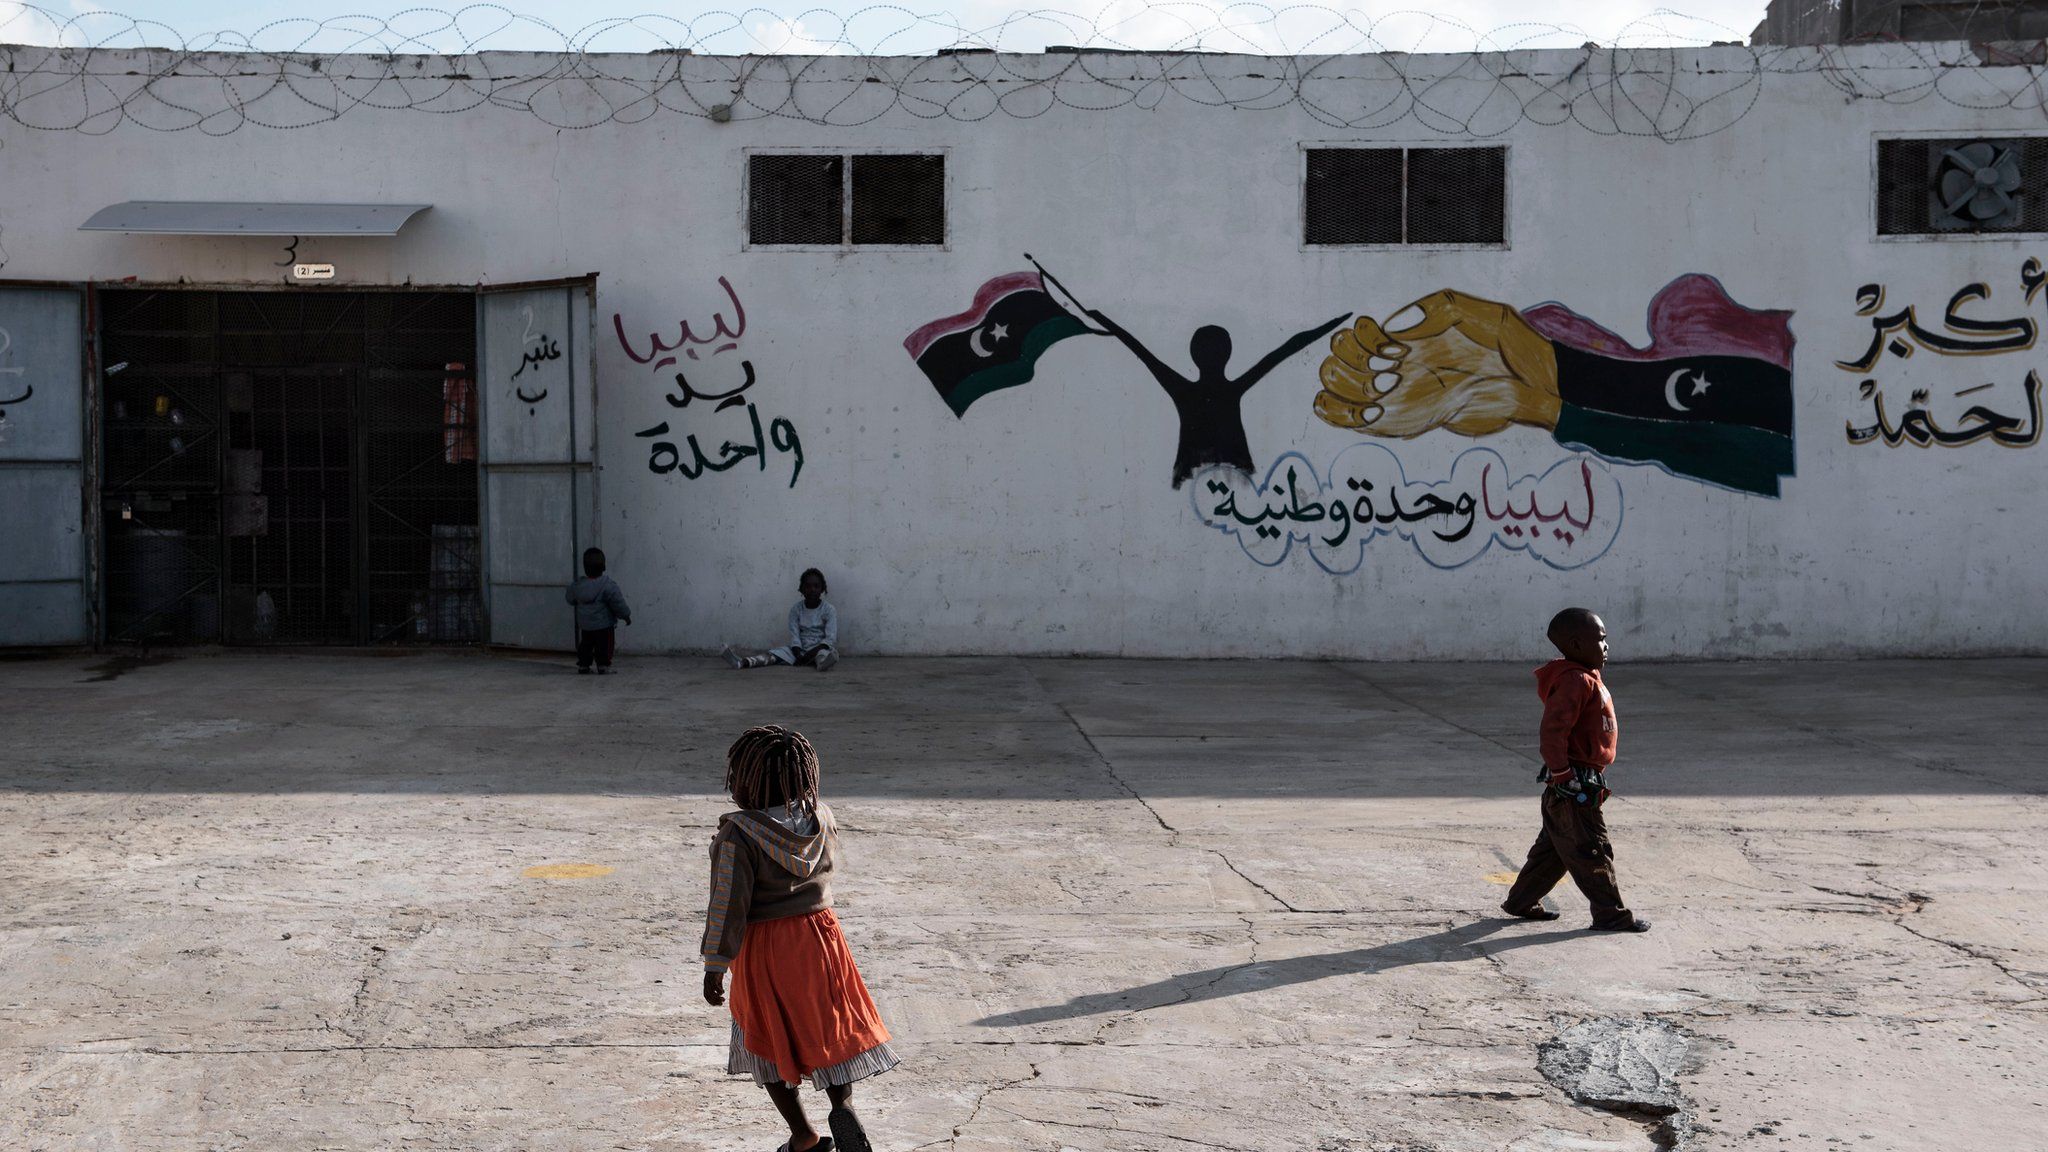 Migrant children walk outside a detention centre in Libya on 30 January 2017